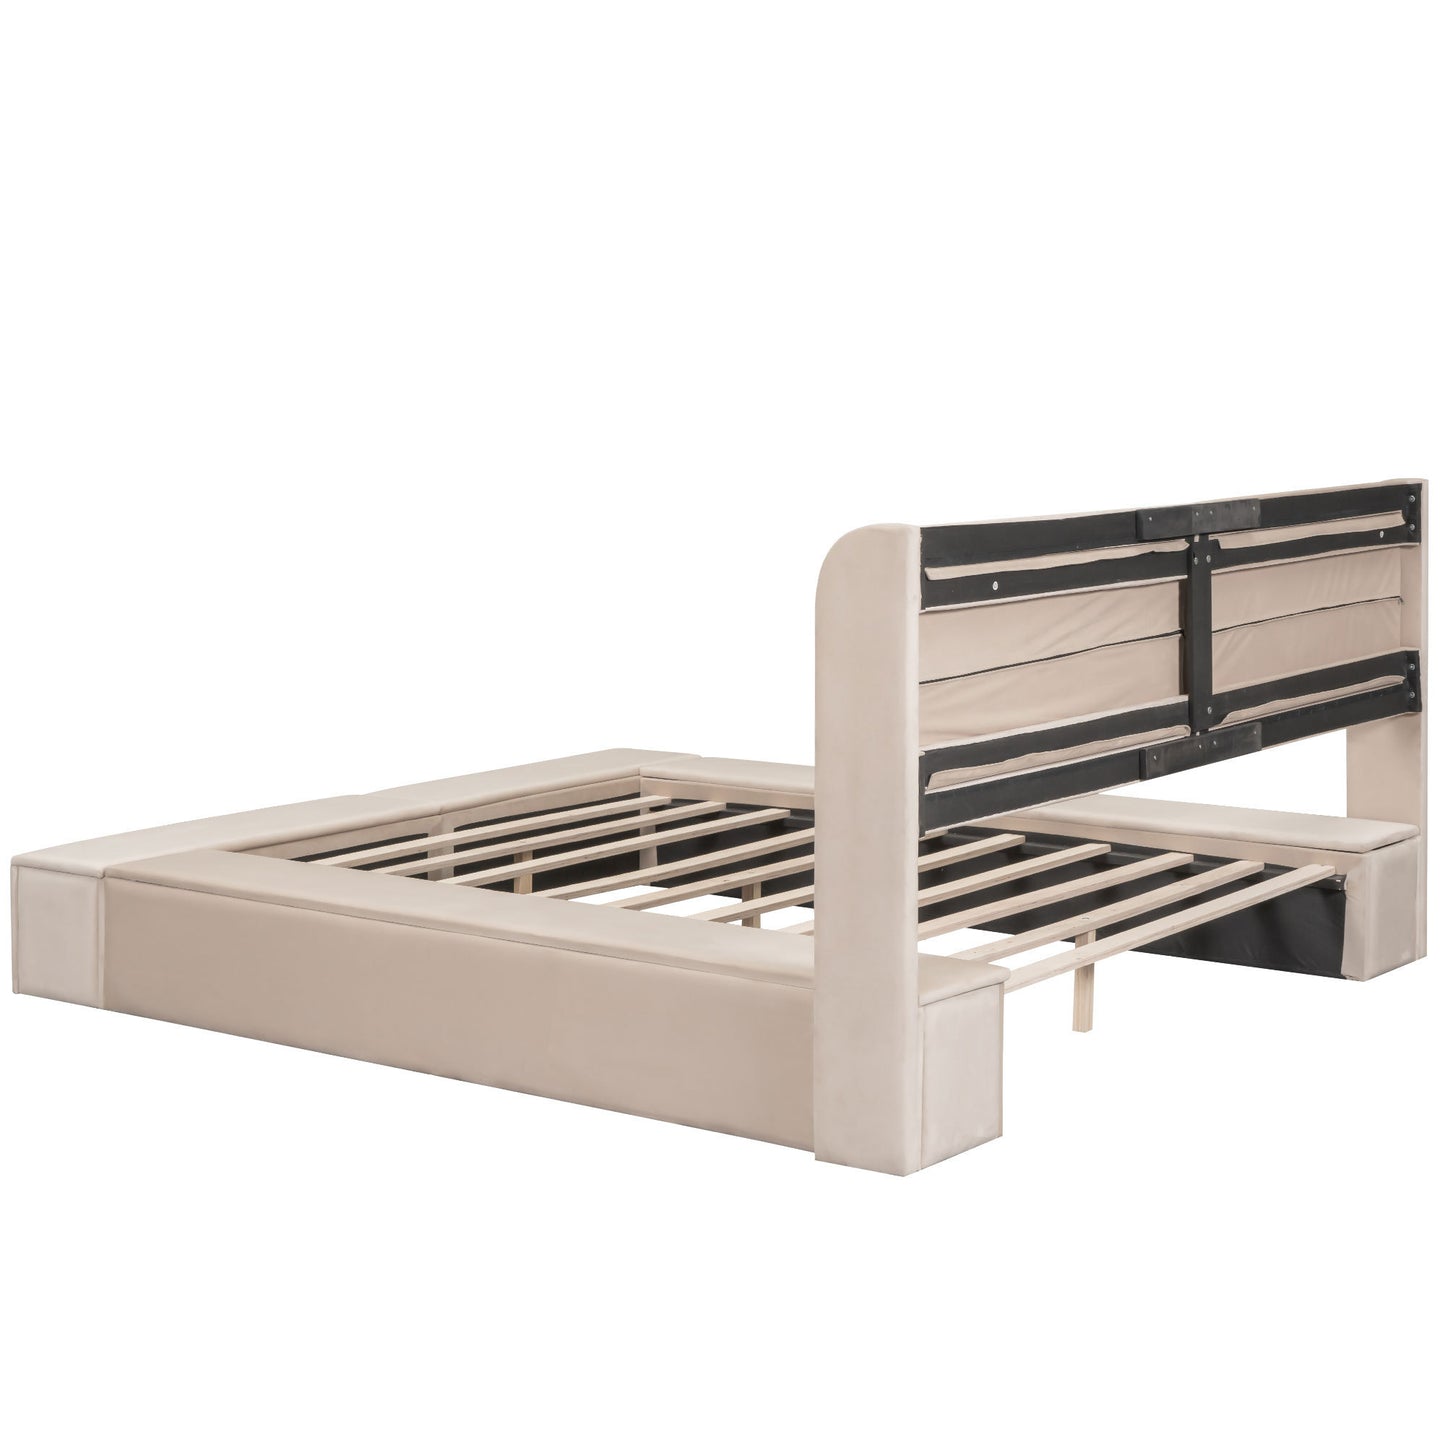 Queen Size Upholstery Storage Platform Bed with Storage Space on both Sides and Footboard, Beige